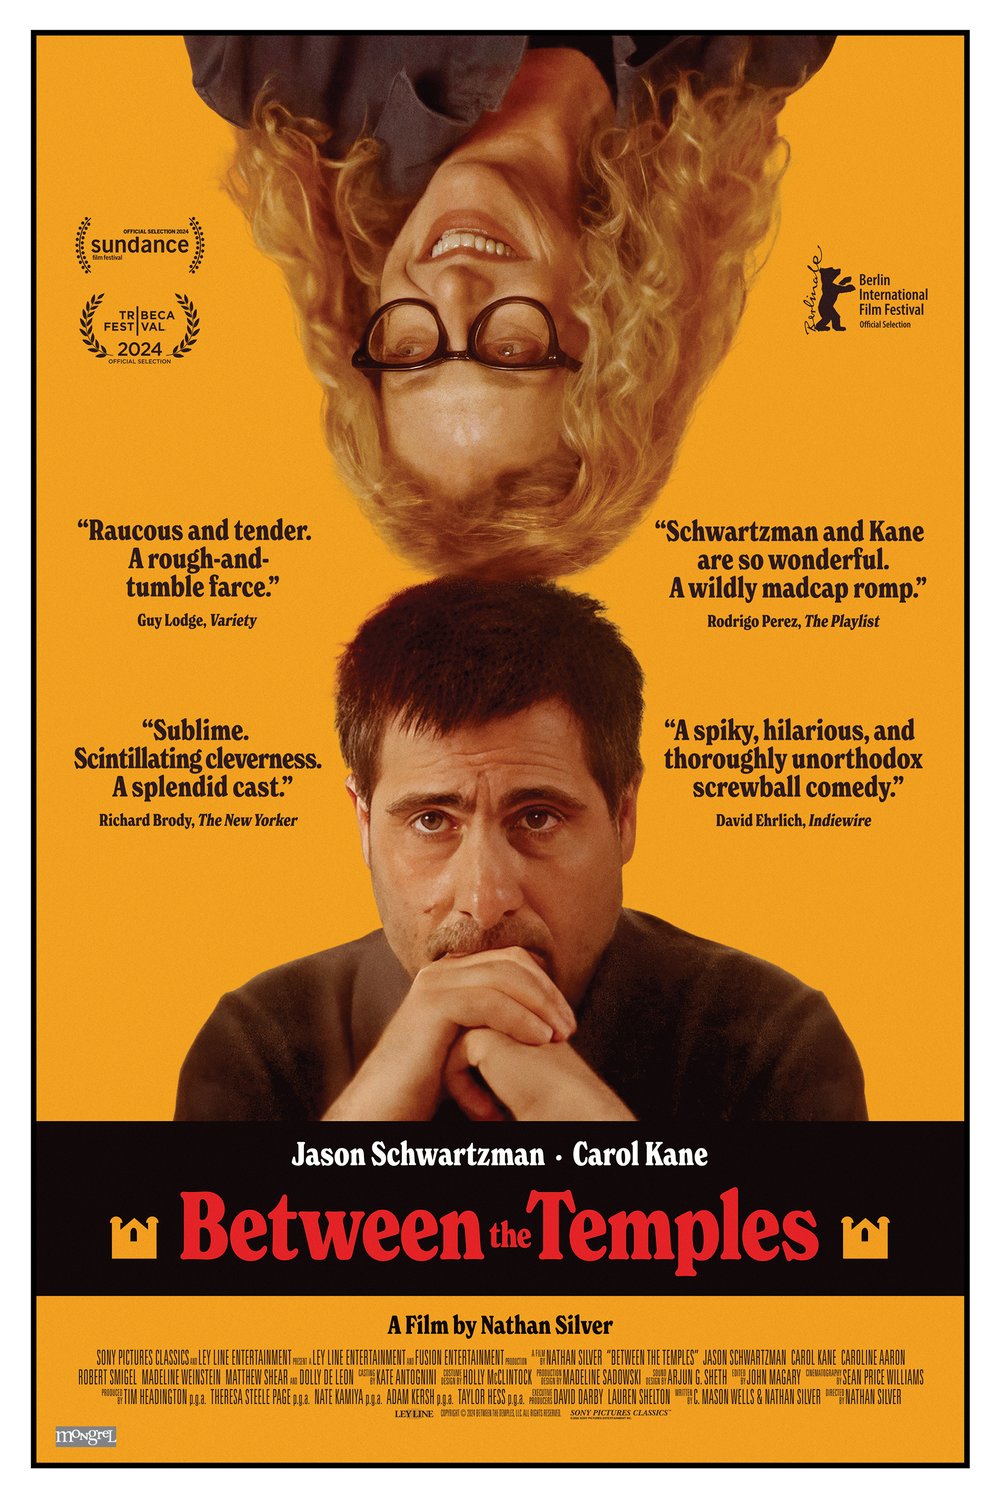 Poster of the movie Between the Temples